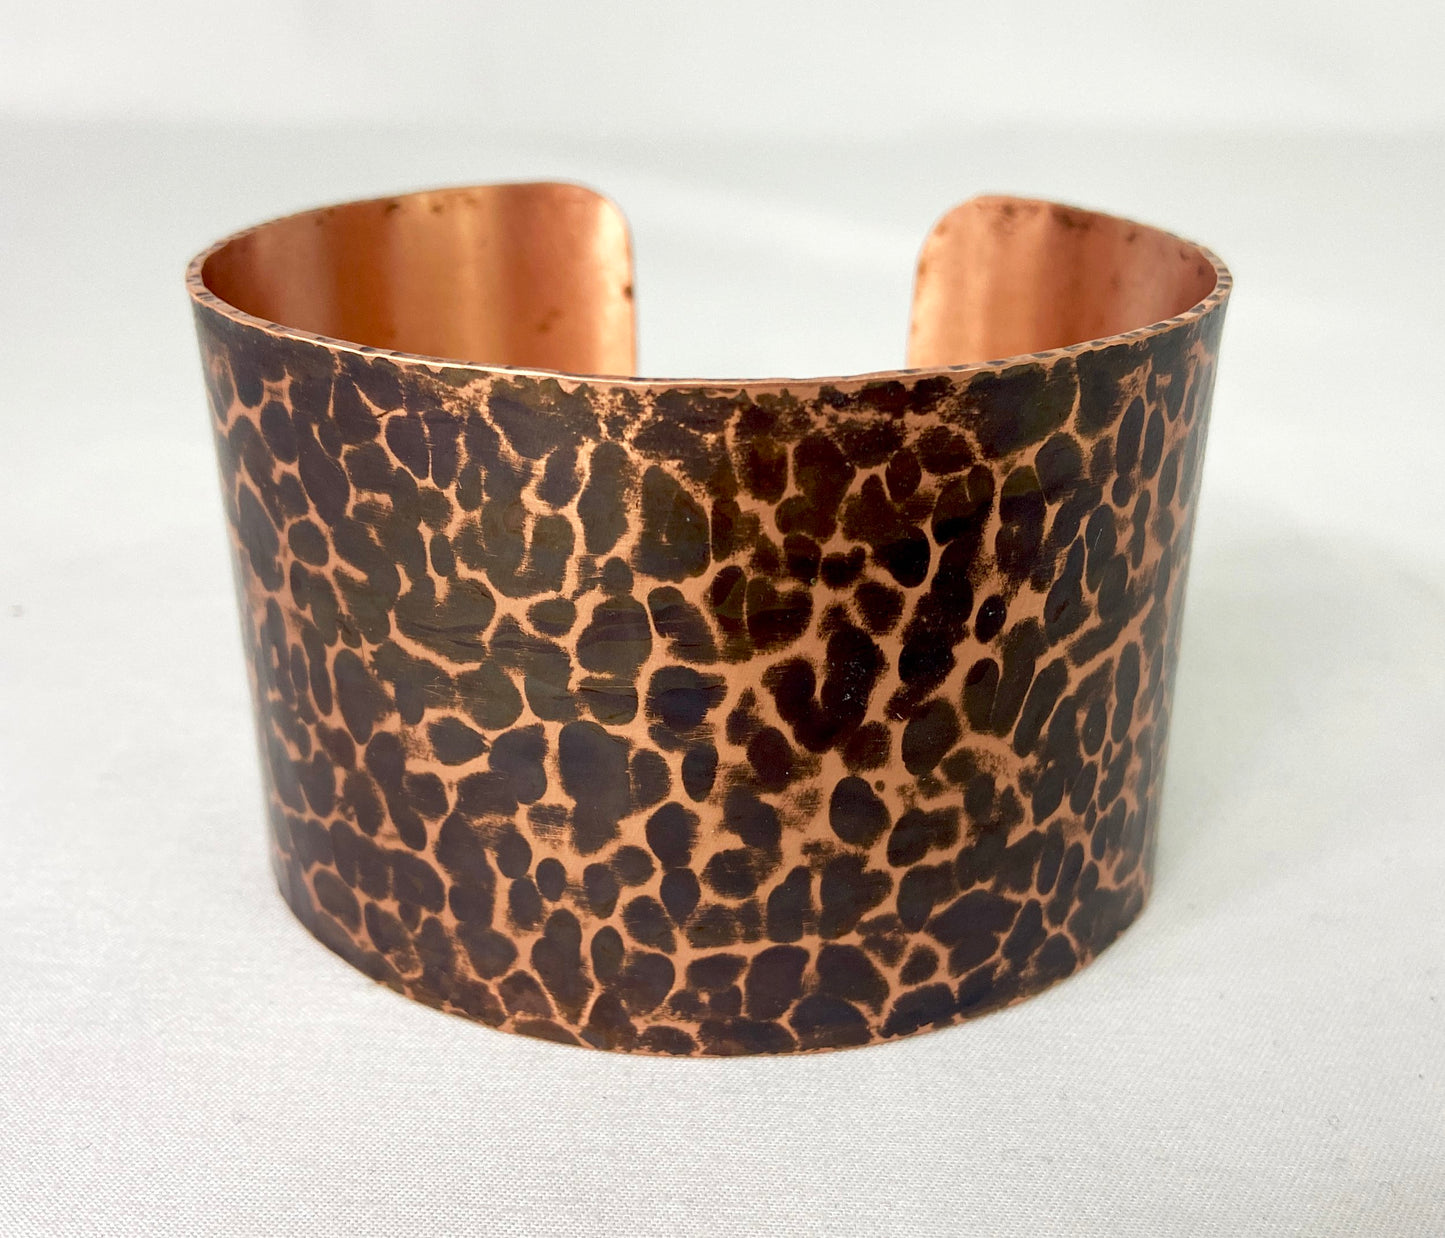 Large Hammered Copper Cuff Bracelet with Torch Patina